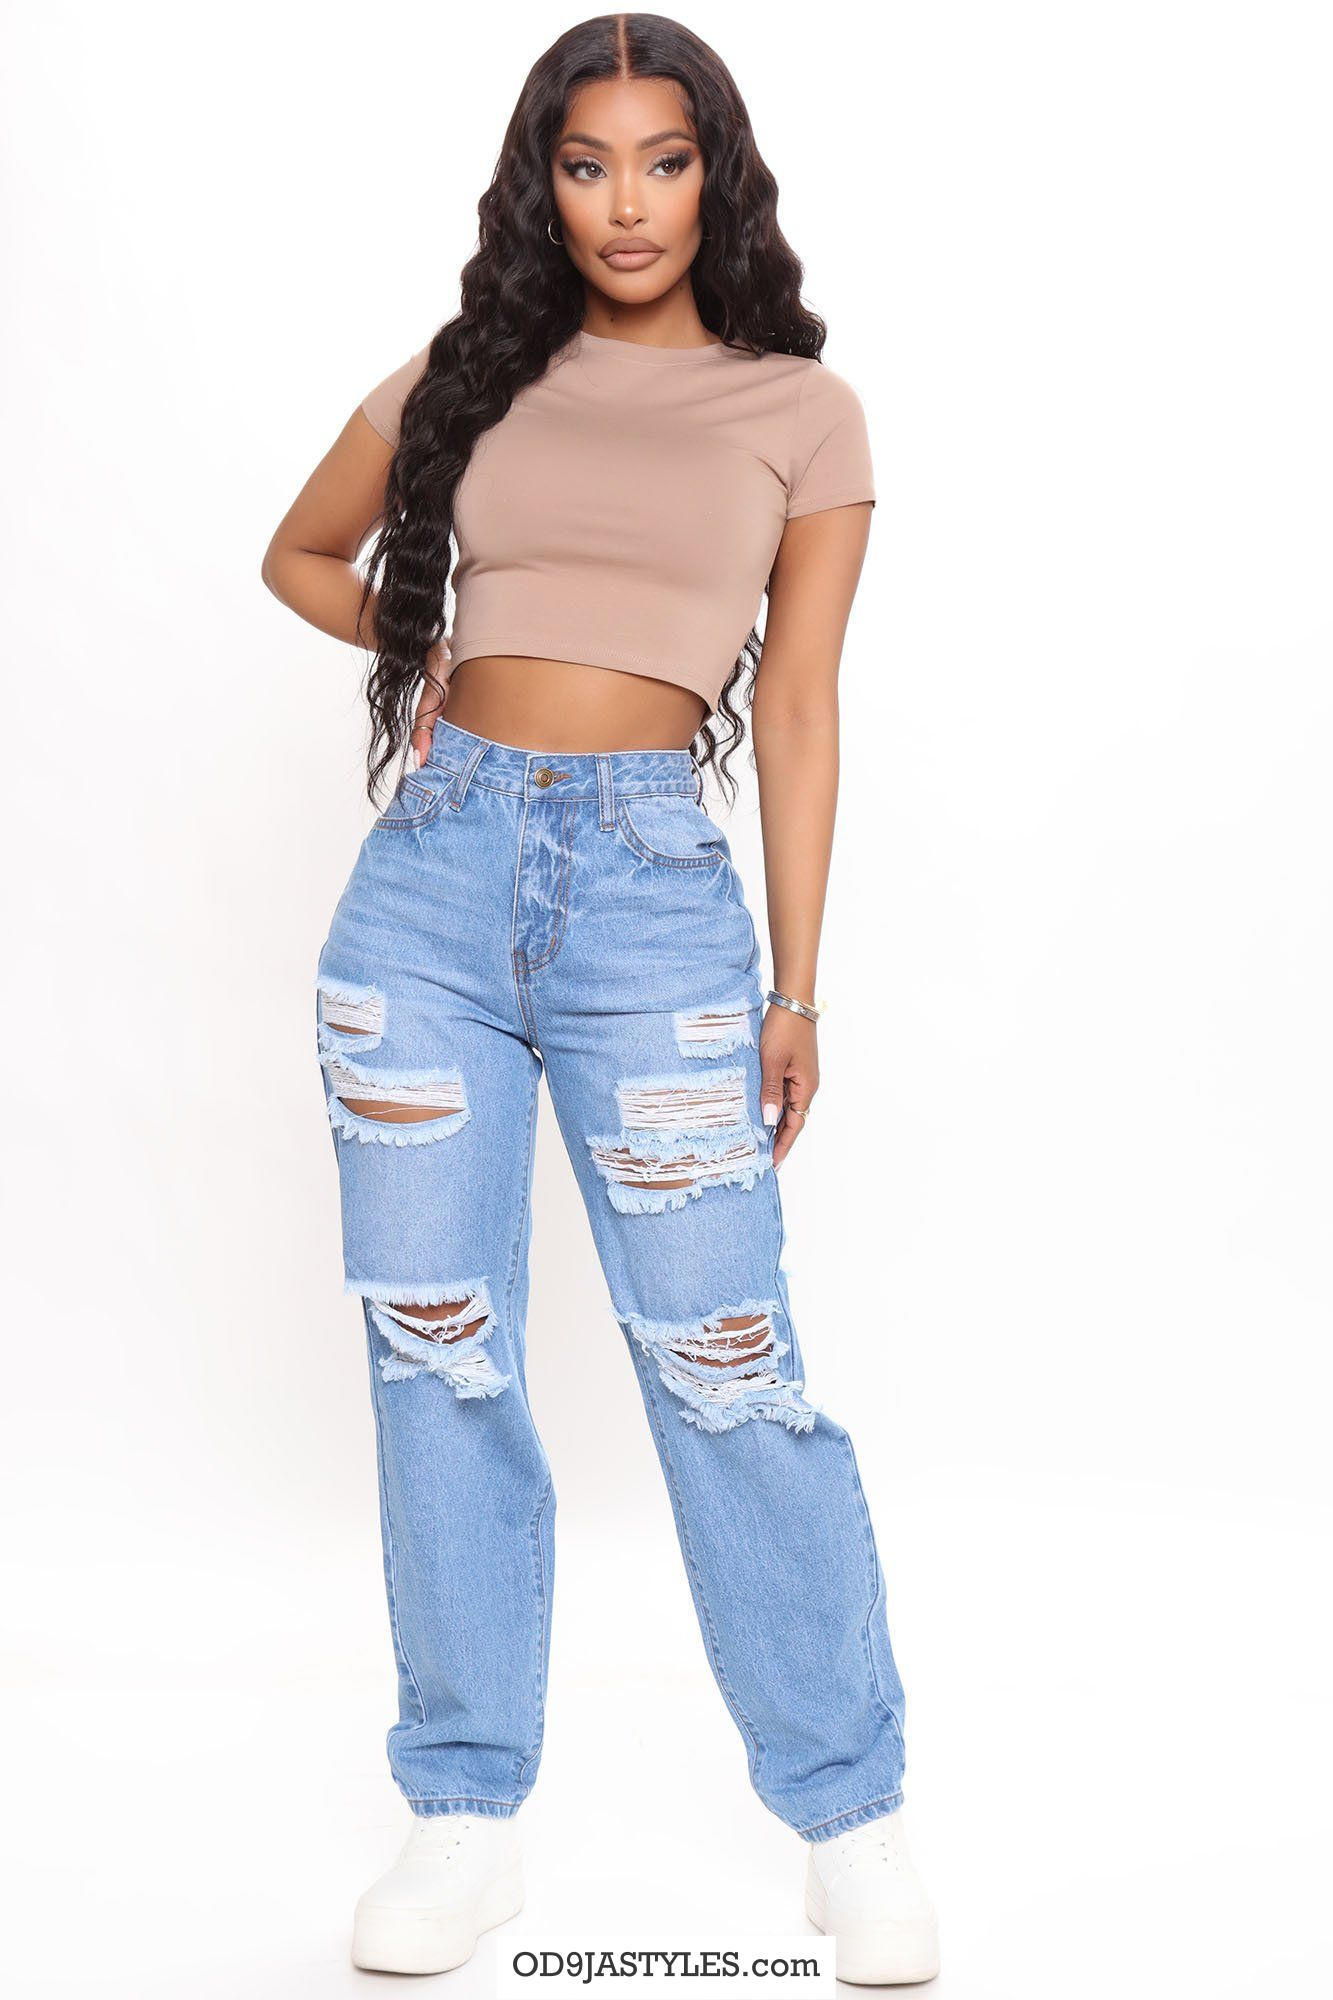 How to Style Boyfriend Jeans for a More Polished Look